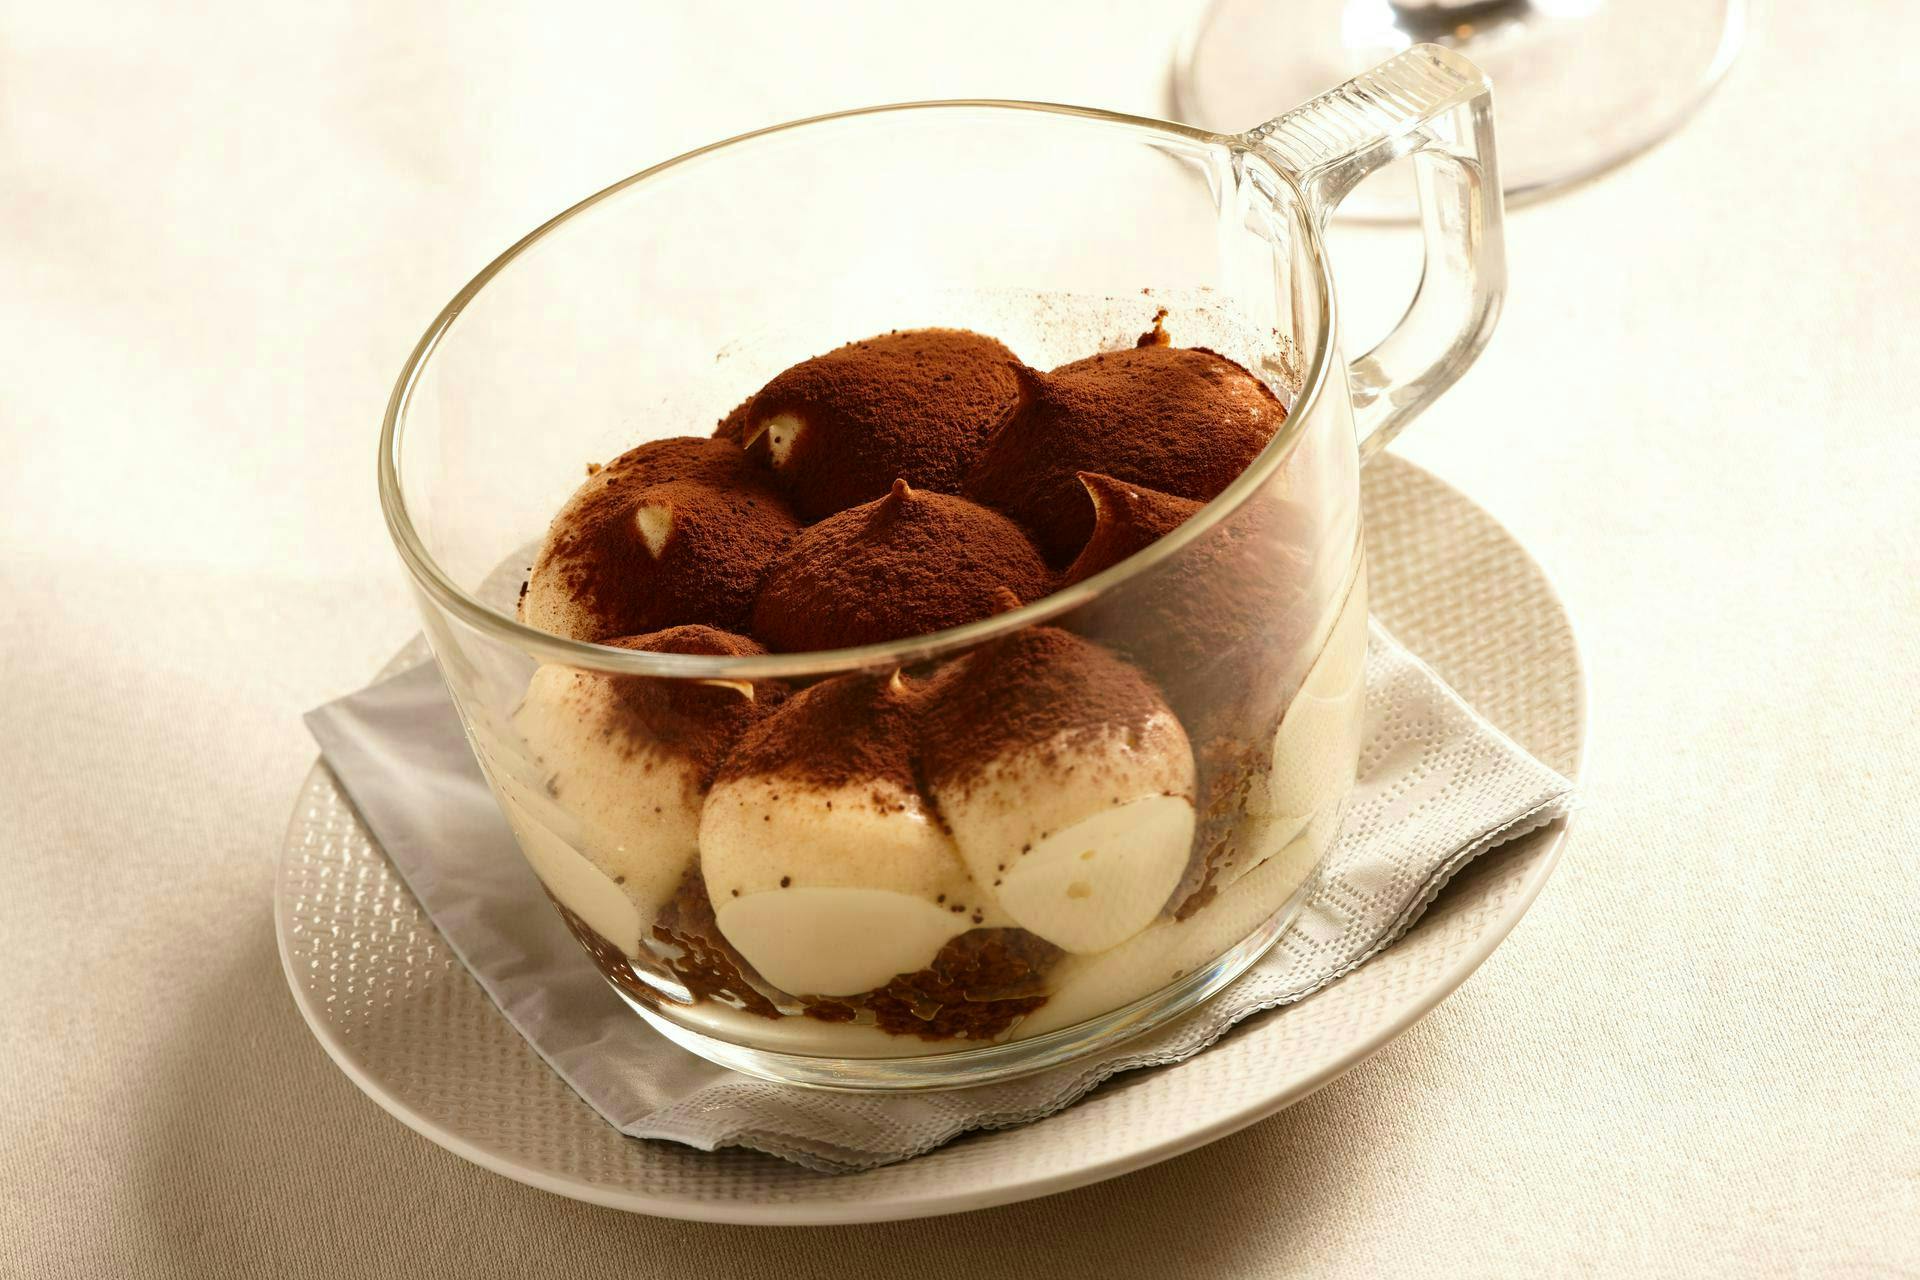 dessert food sweets confectionery cream creme chocolate fudge pottery saucer